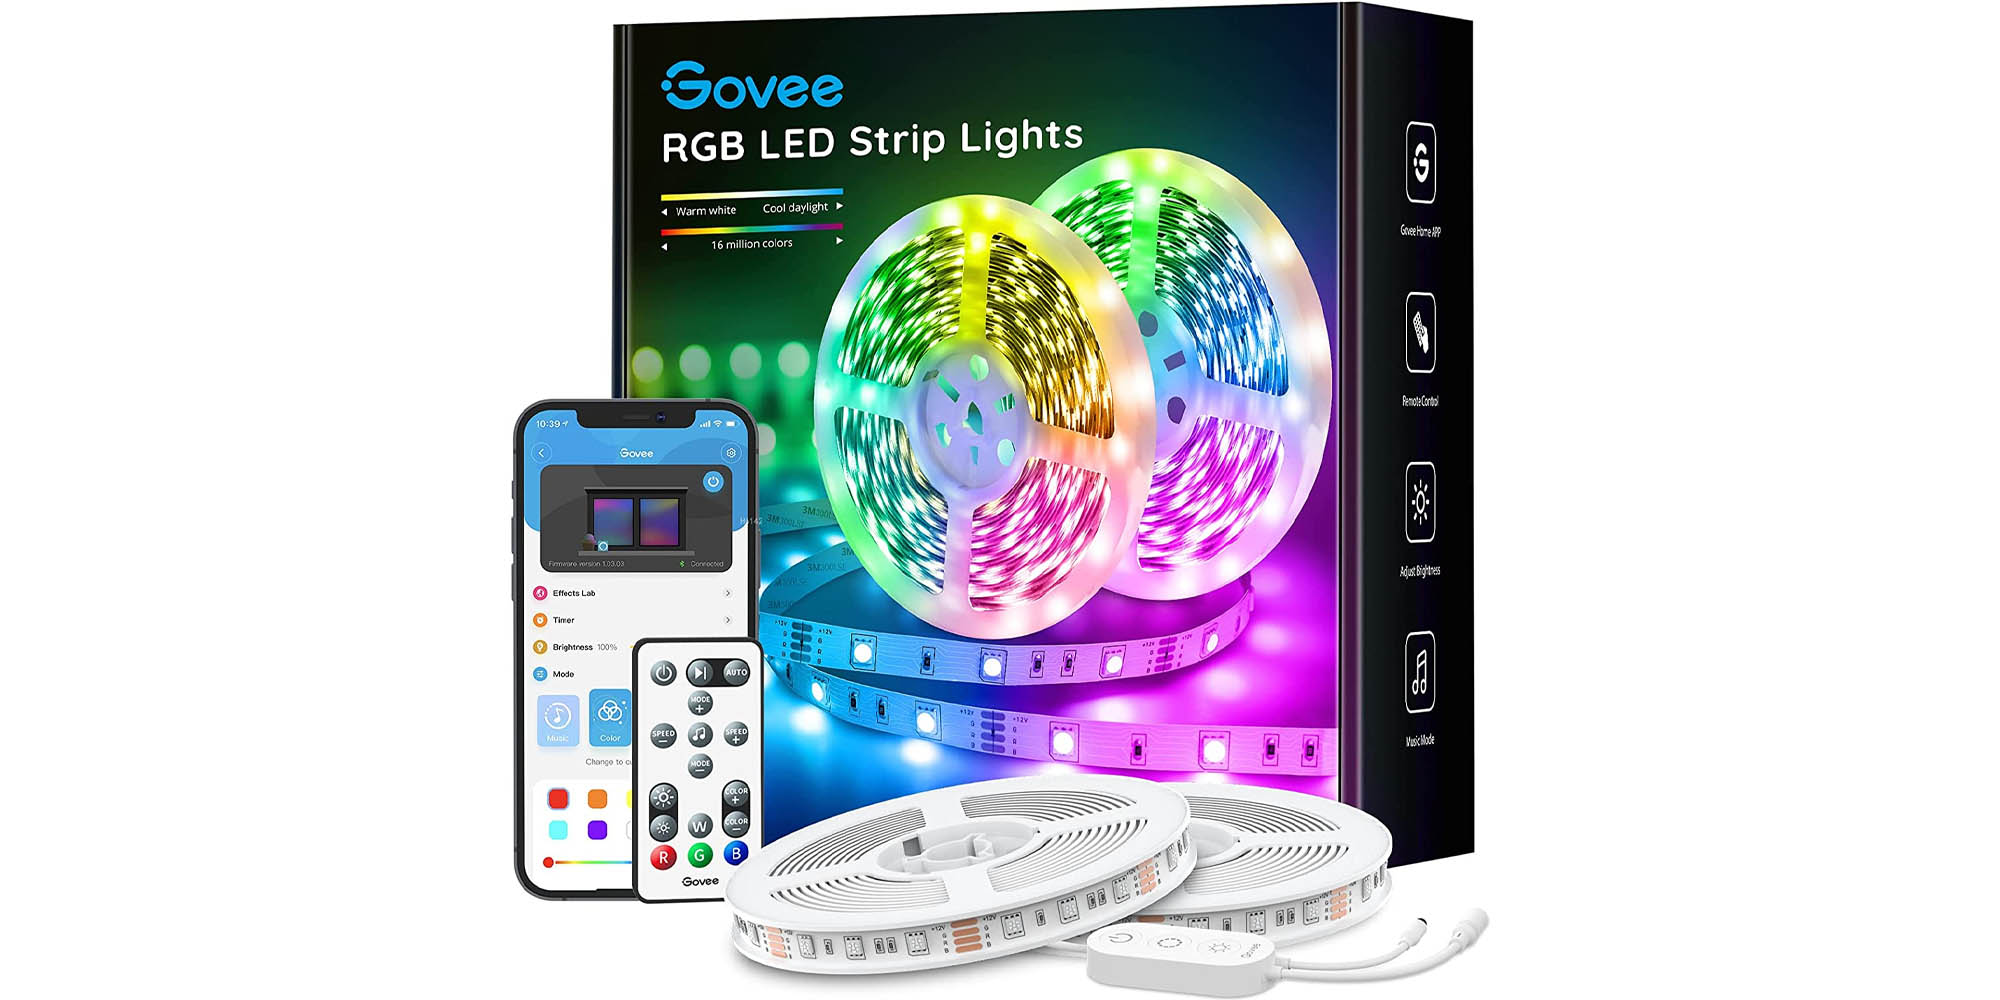 Govee RGBIC Pro LED Strip Lights, 16.4ft Color Changing Smart LED Strips,  Works with Alexa